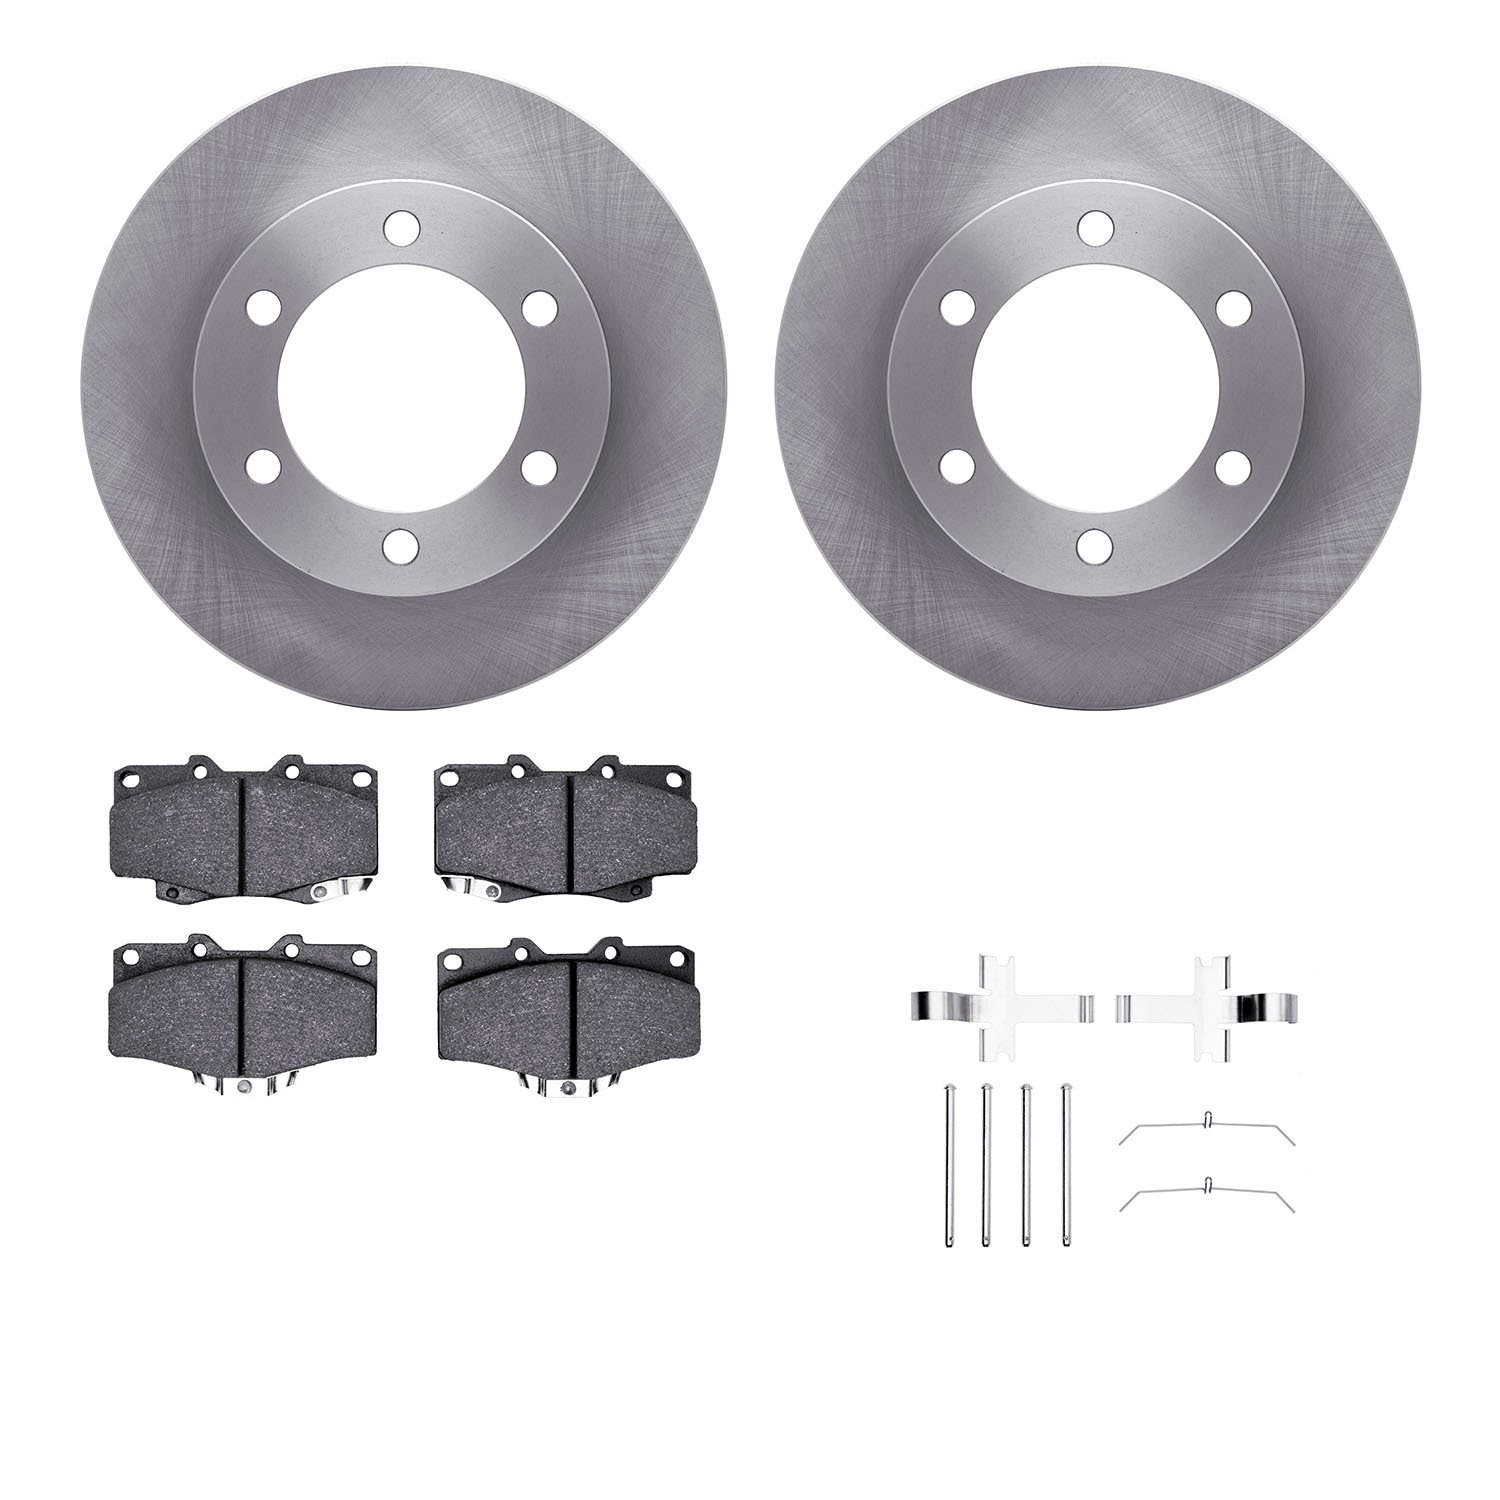 6412-76031 Brake Rotors with Ultimate-Duty Brake Pads Kit & Hardware, 1995-2004 Lexus/Toyota/Scion, Position: Front